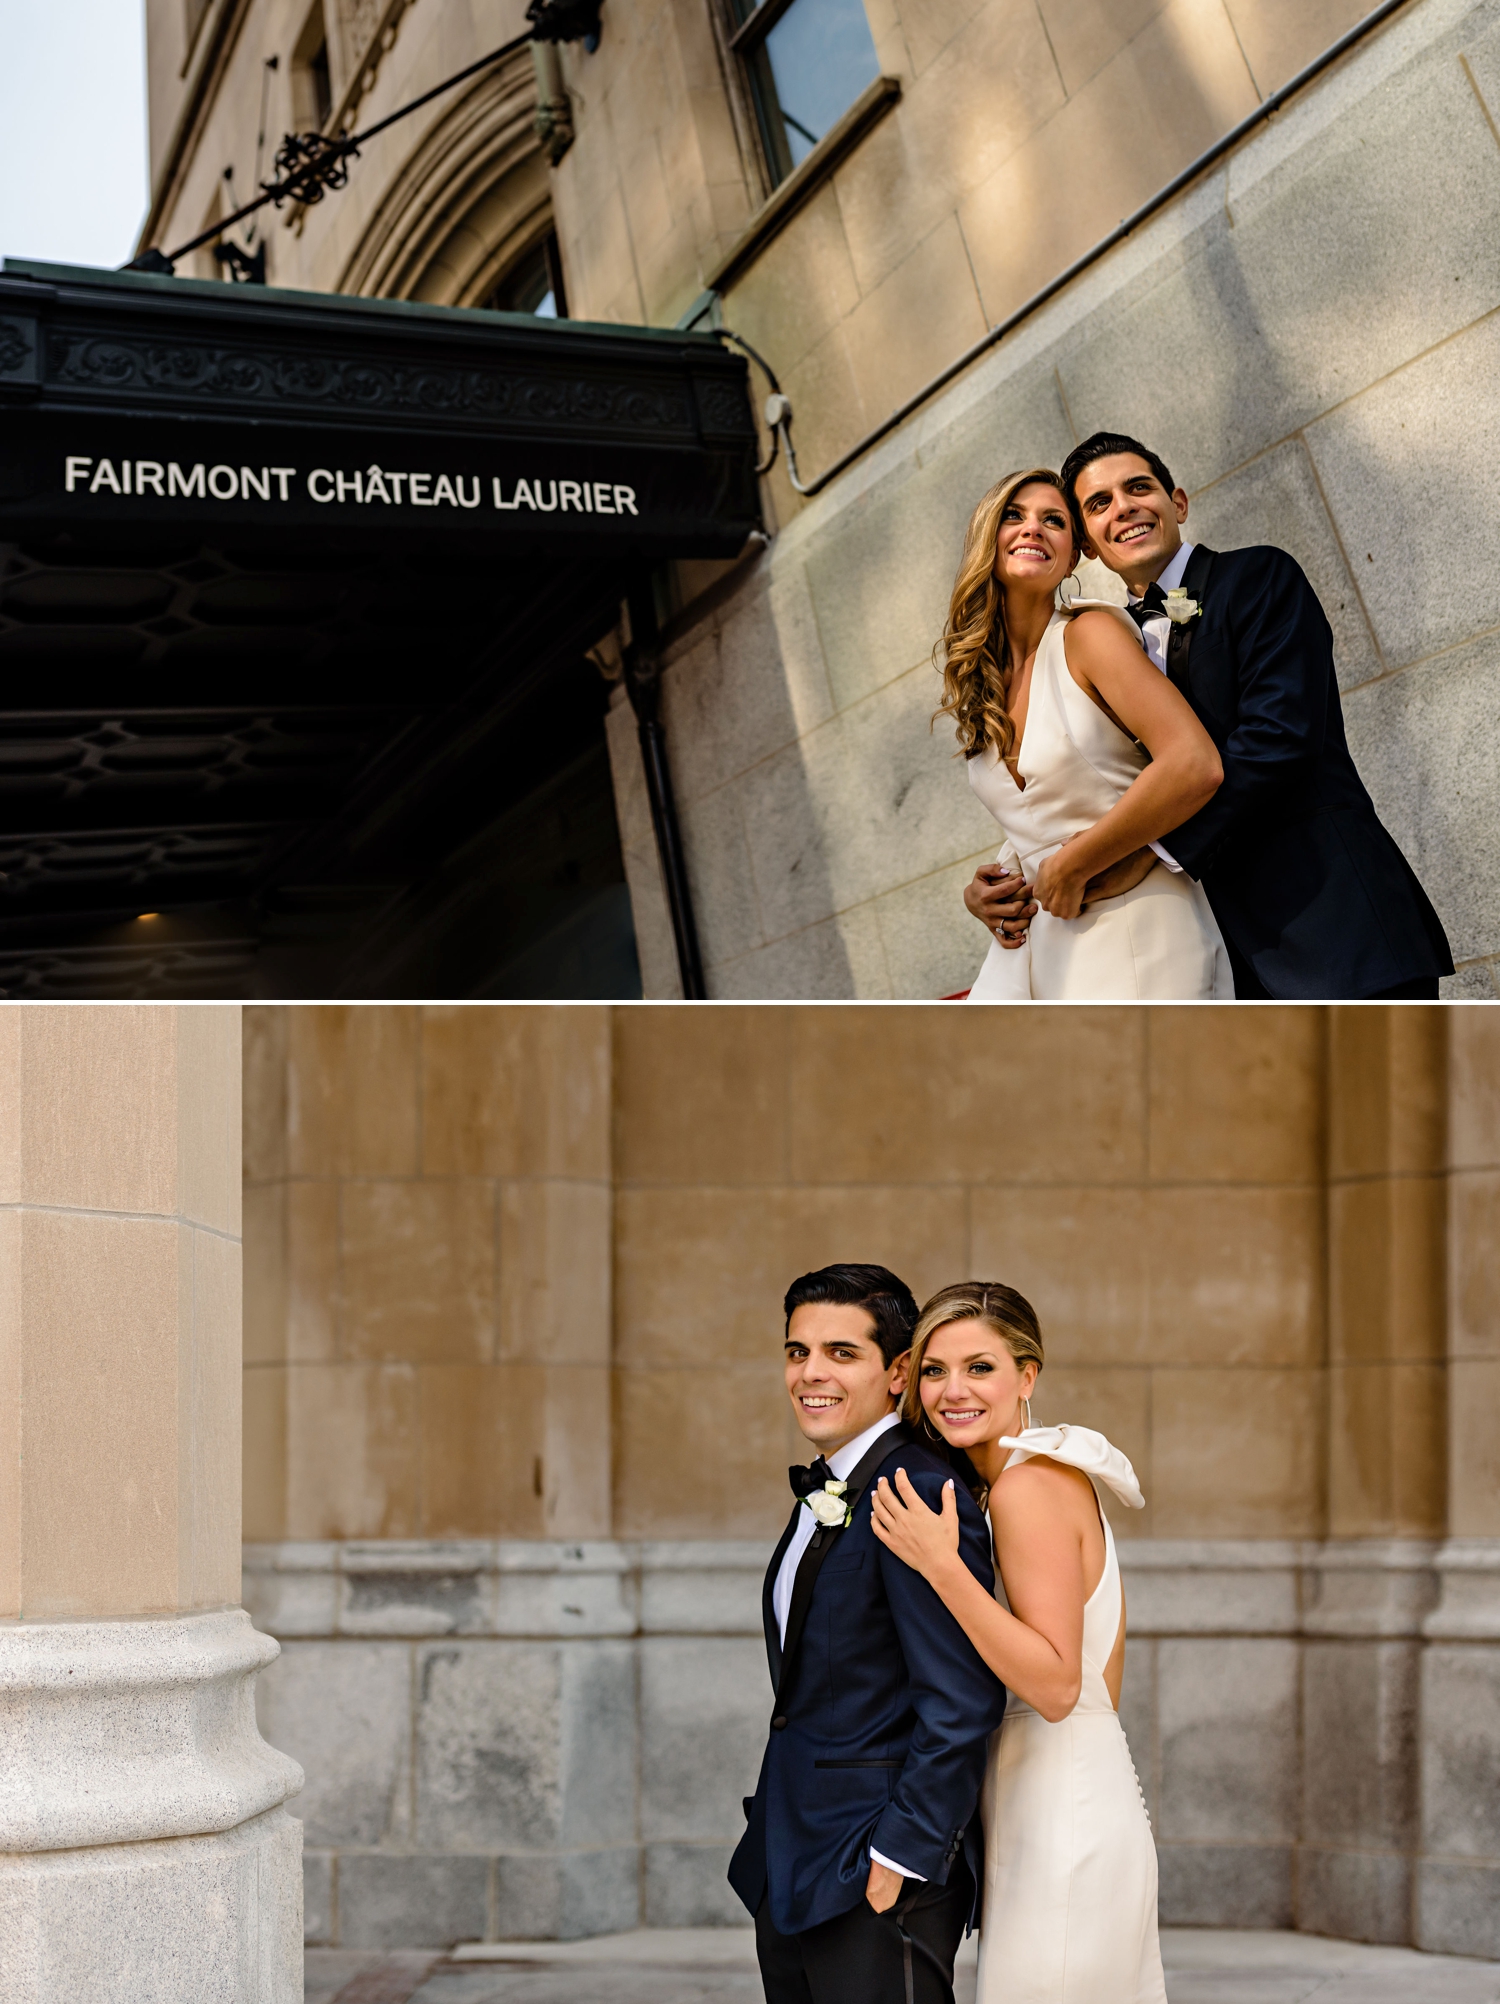 photos of bride and groom at a chateau laurier jewish wedding in ottawa ontario